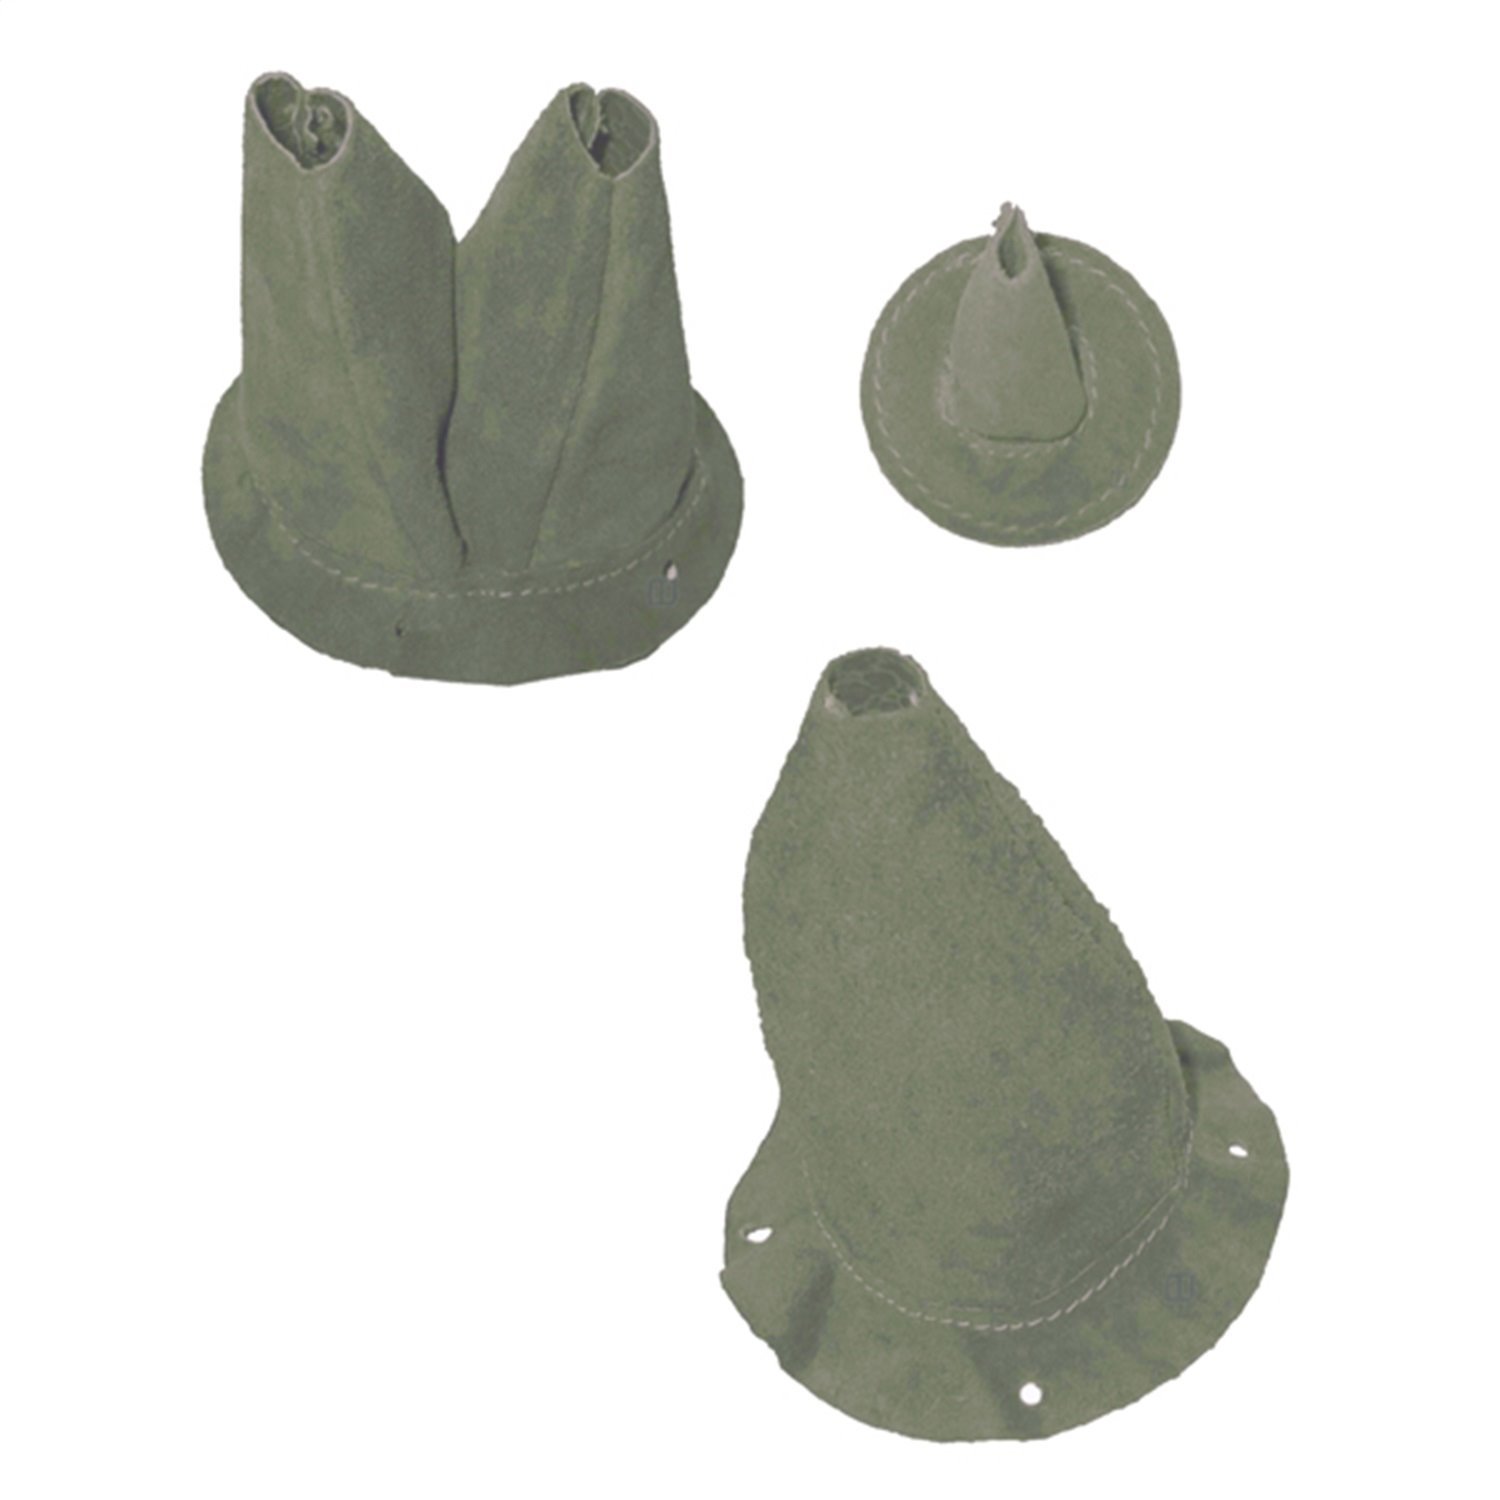 LEATHER BOOT KIT 3 pieceS 41-45 MB-GPW PEA